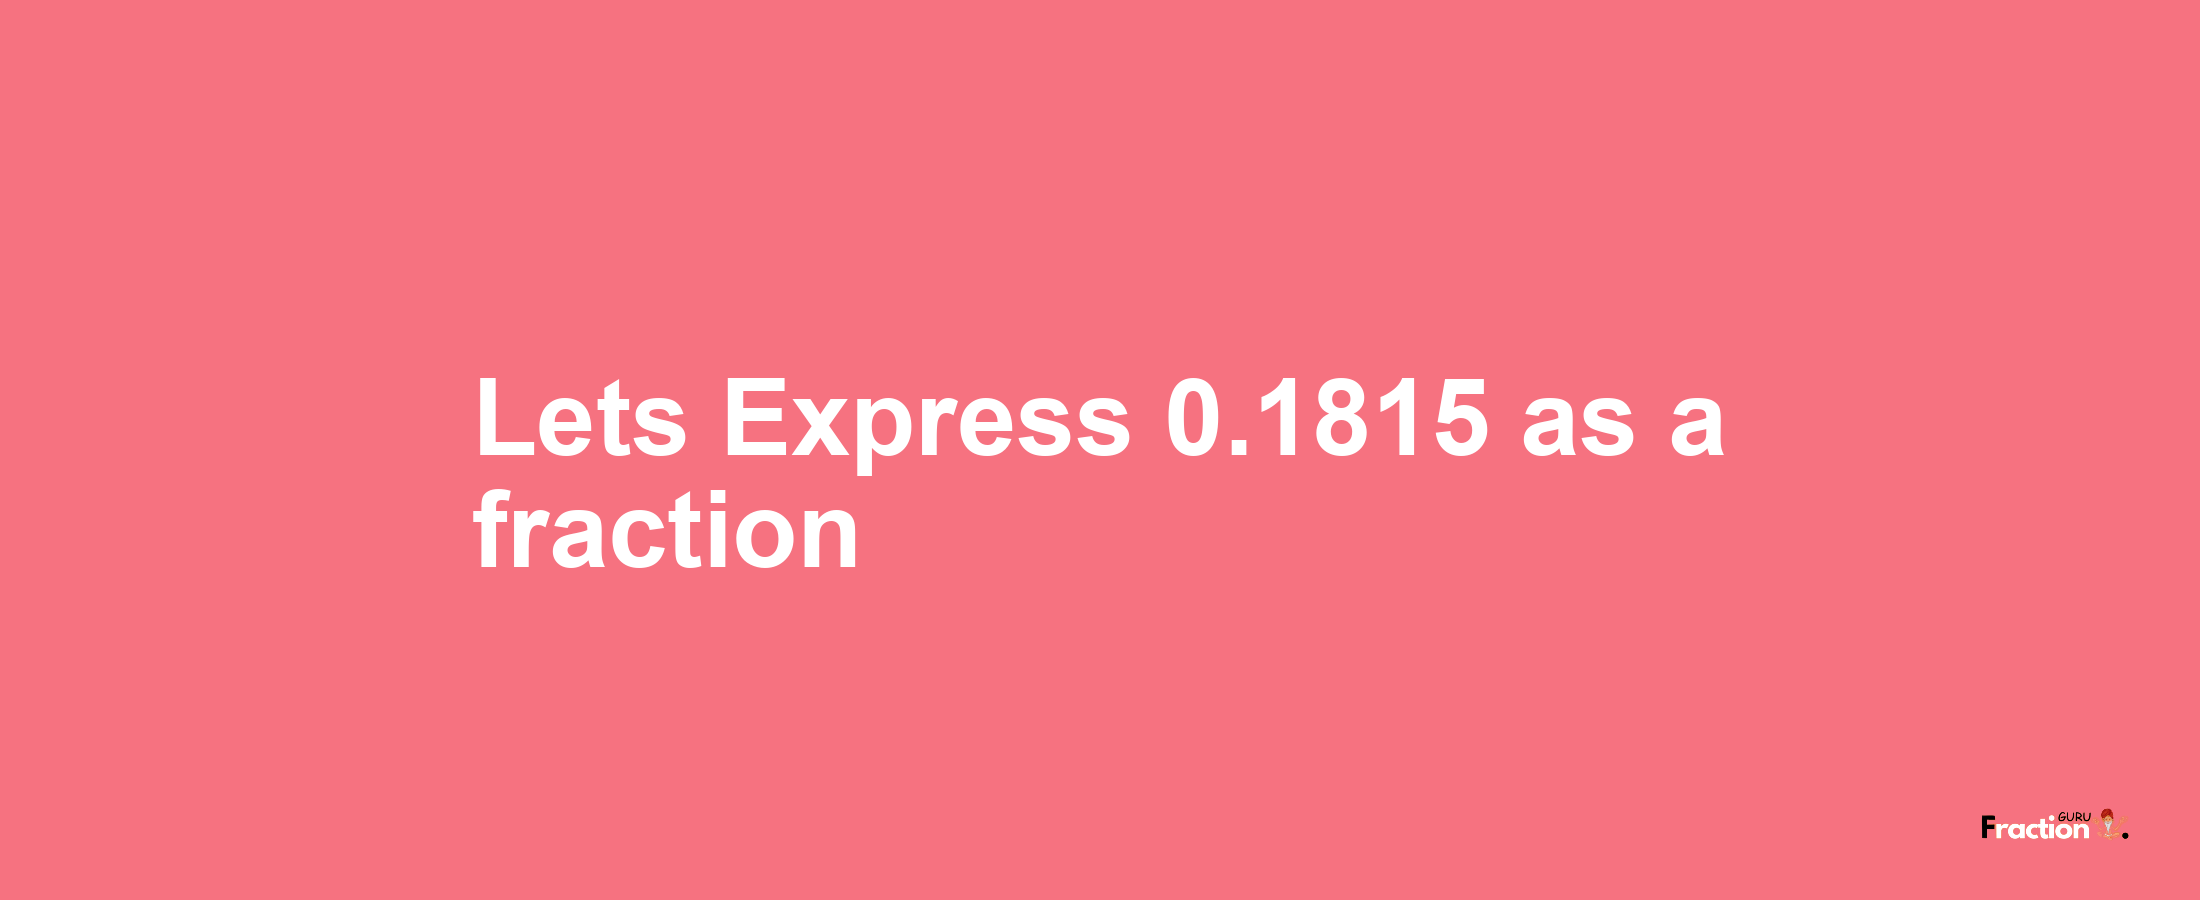 Lets Express 0.1815 as afraction